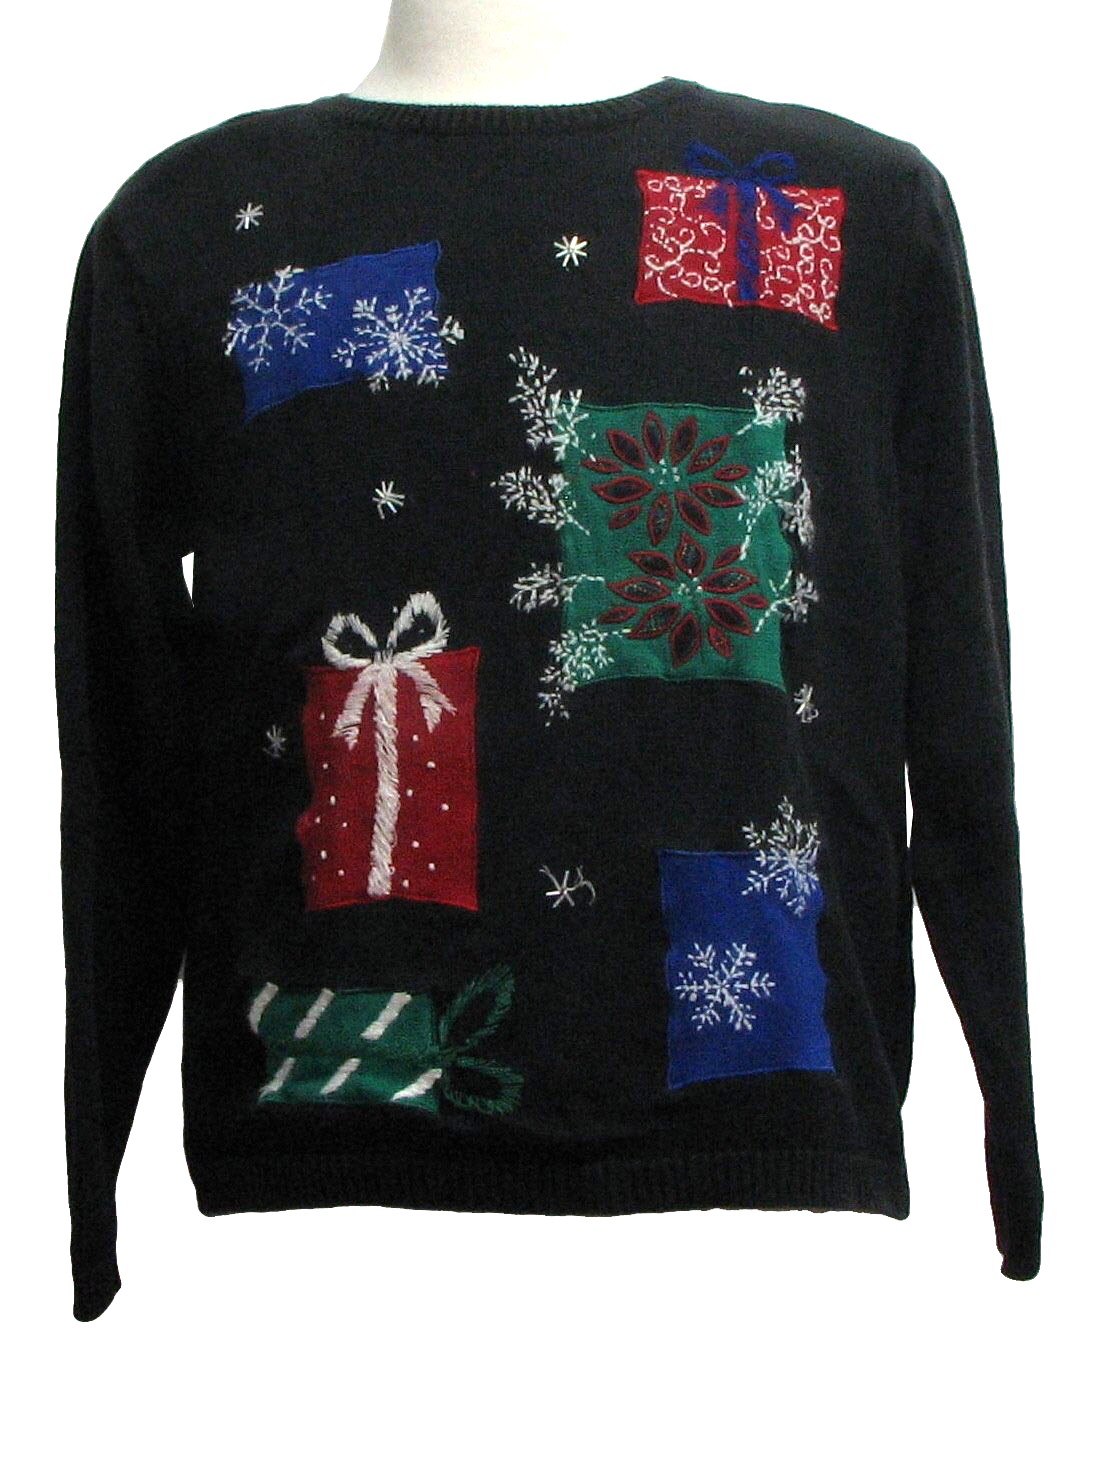 Womens Ugly Christmas Sweater: -Alfred Dunner- Womens black background ...